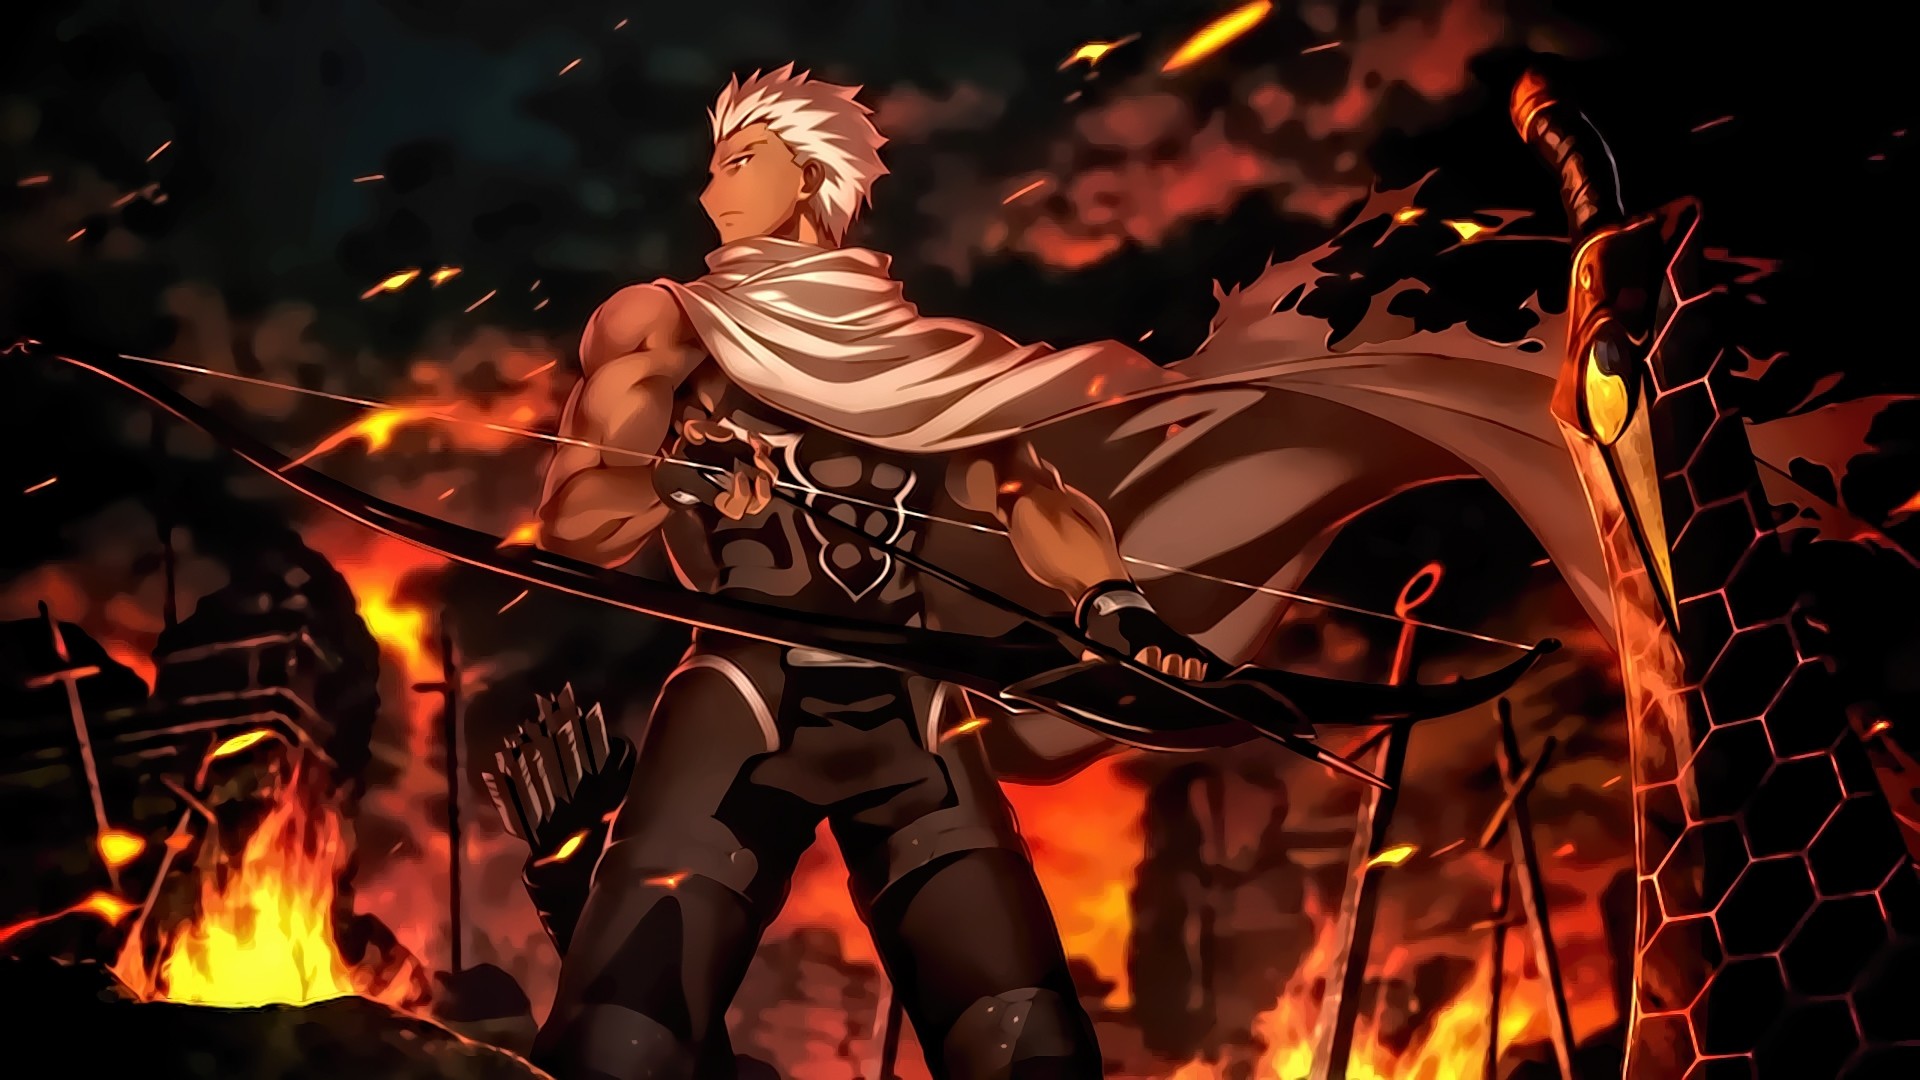 1920x1080 Fate/stay night: Unlimited Blade Works Wallpapers